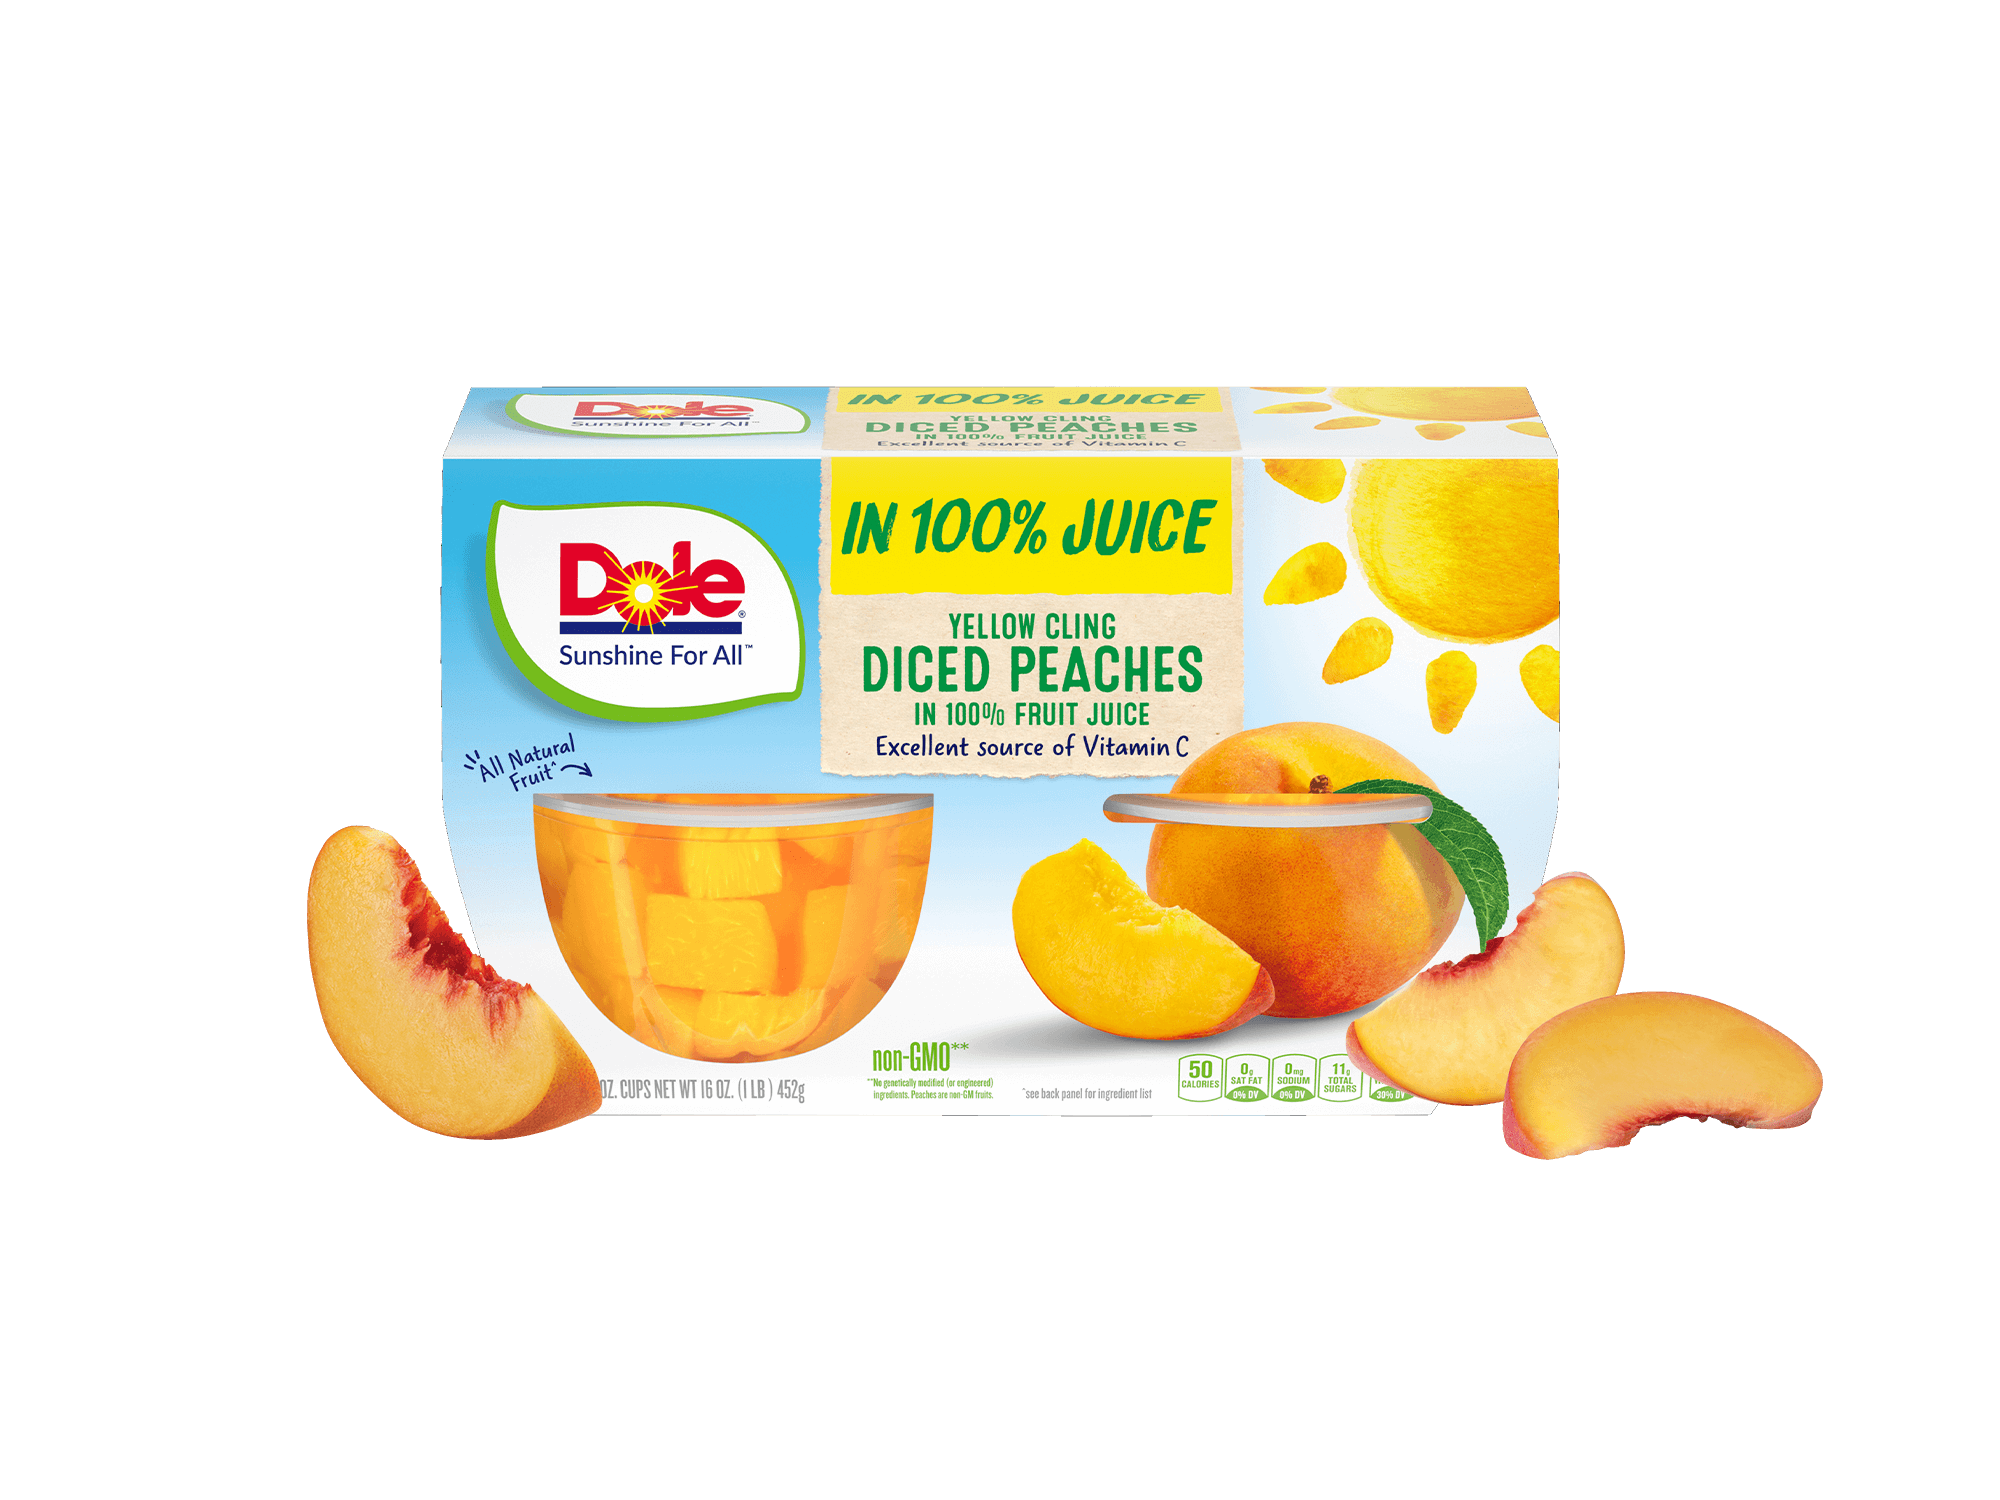 https://dolesunshine.com/wp-content/uploads/sites/2/2022/08/Yellow-Cling-Diced-Peaches-in-100-juice-Composite.png